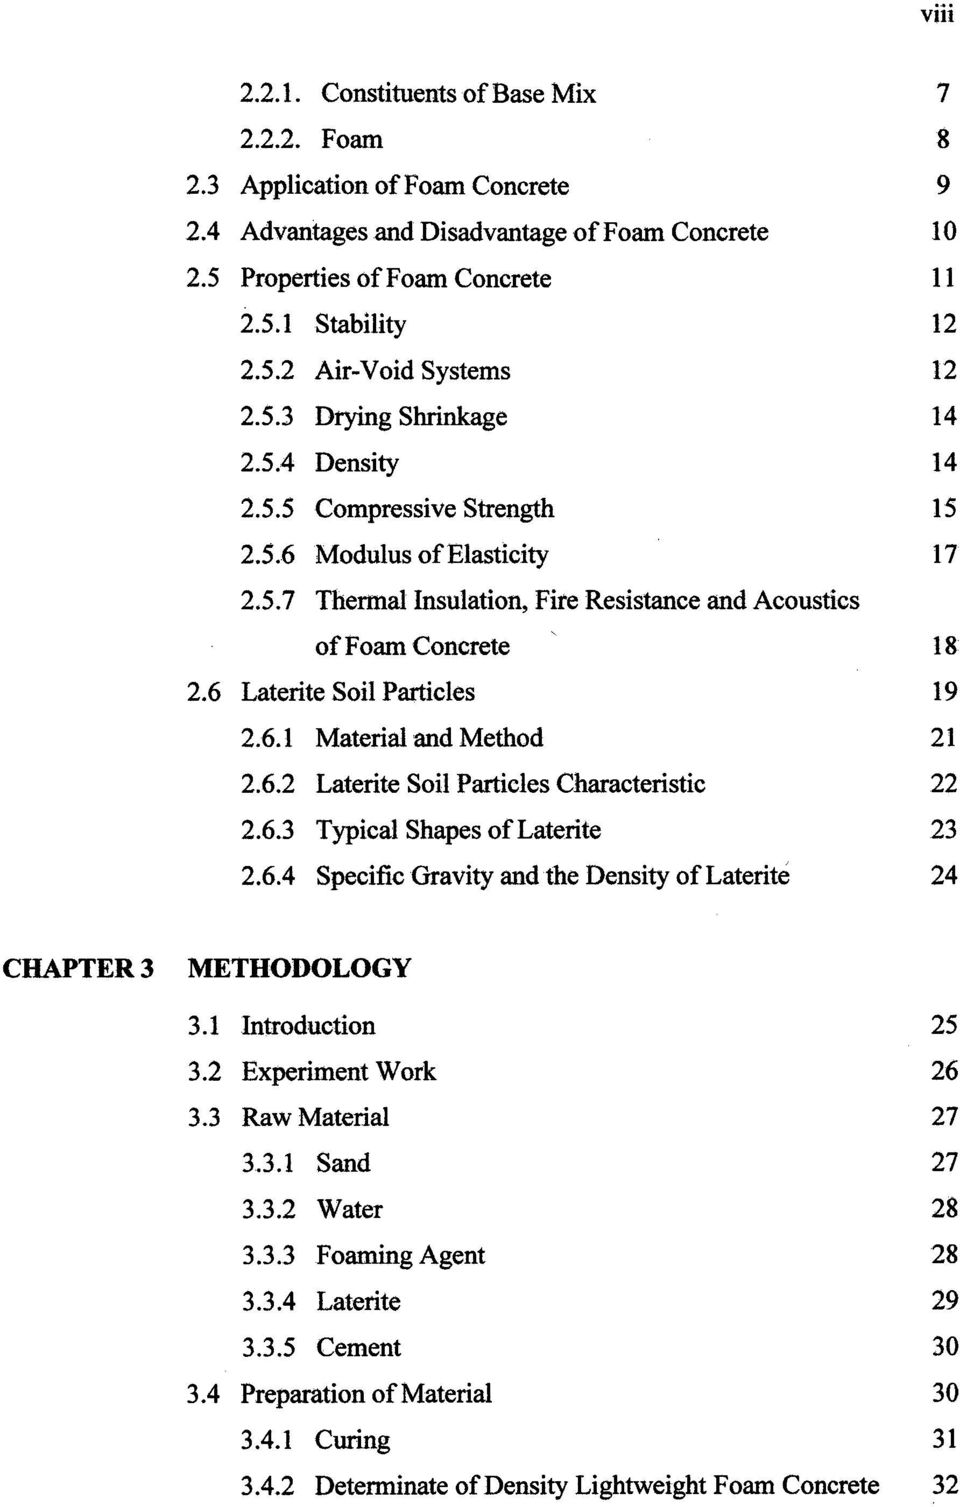 6 Laterite Soil Particles 19 2.6.1 Material and Method 21 2.6.2 Laterite Soil Particles Characteristic 22 2.6.3 Typical Shapes of Laterite 23 2.6.4 Specific Gravity and the Density of Laterite 24 CHAPTER 3 METHODOLOGY 3.